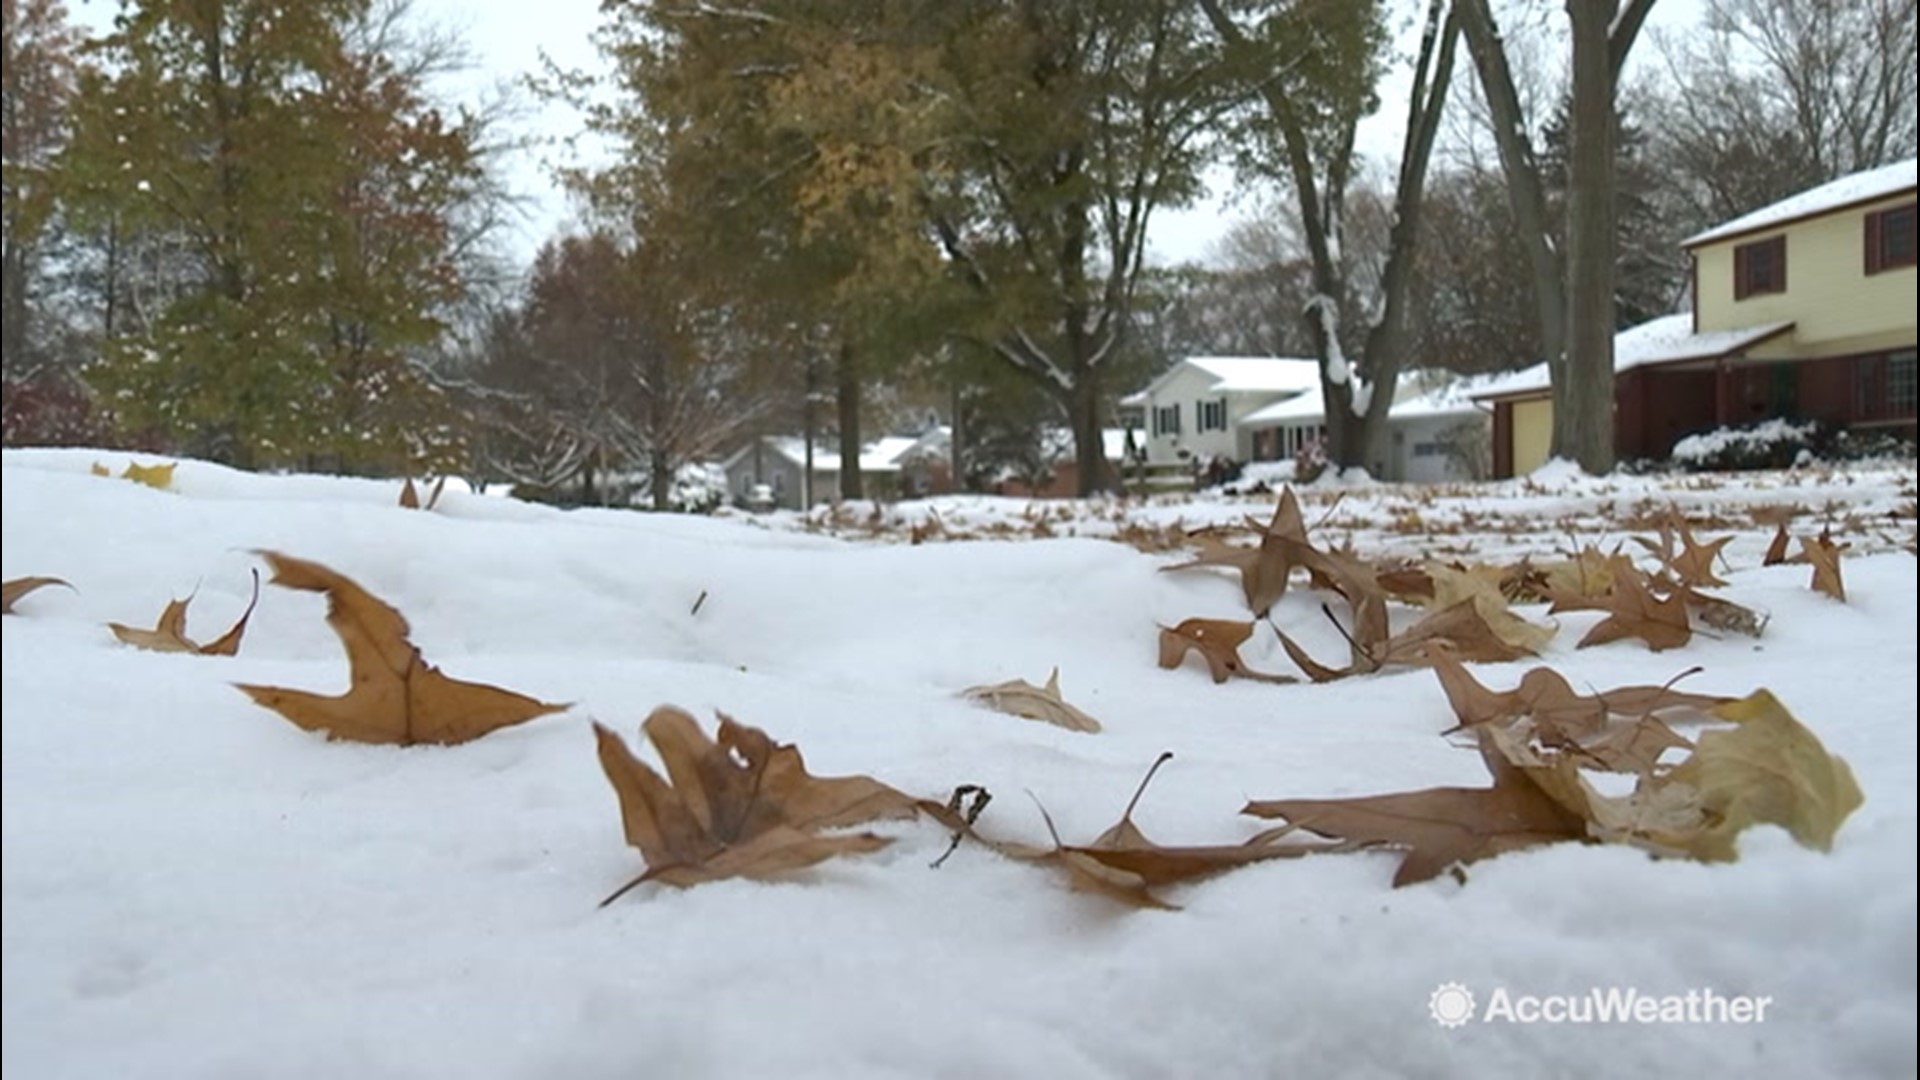 On Wednesday, Nov. 13, the city of Kalamazoo, Michigan, reached an all-time low temperature of 11 degrees after slushy snow hit the area just a few days prior. Most people stayed indoors to avoid the bitterly cold conditions.